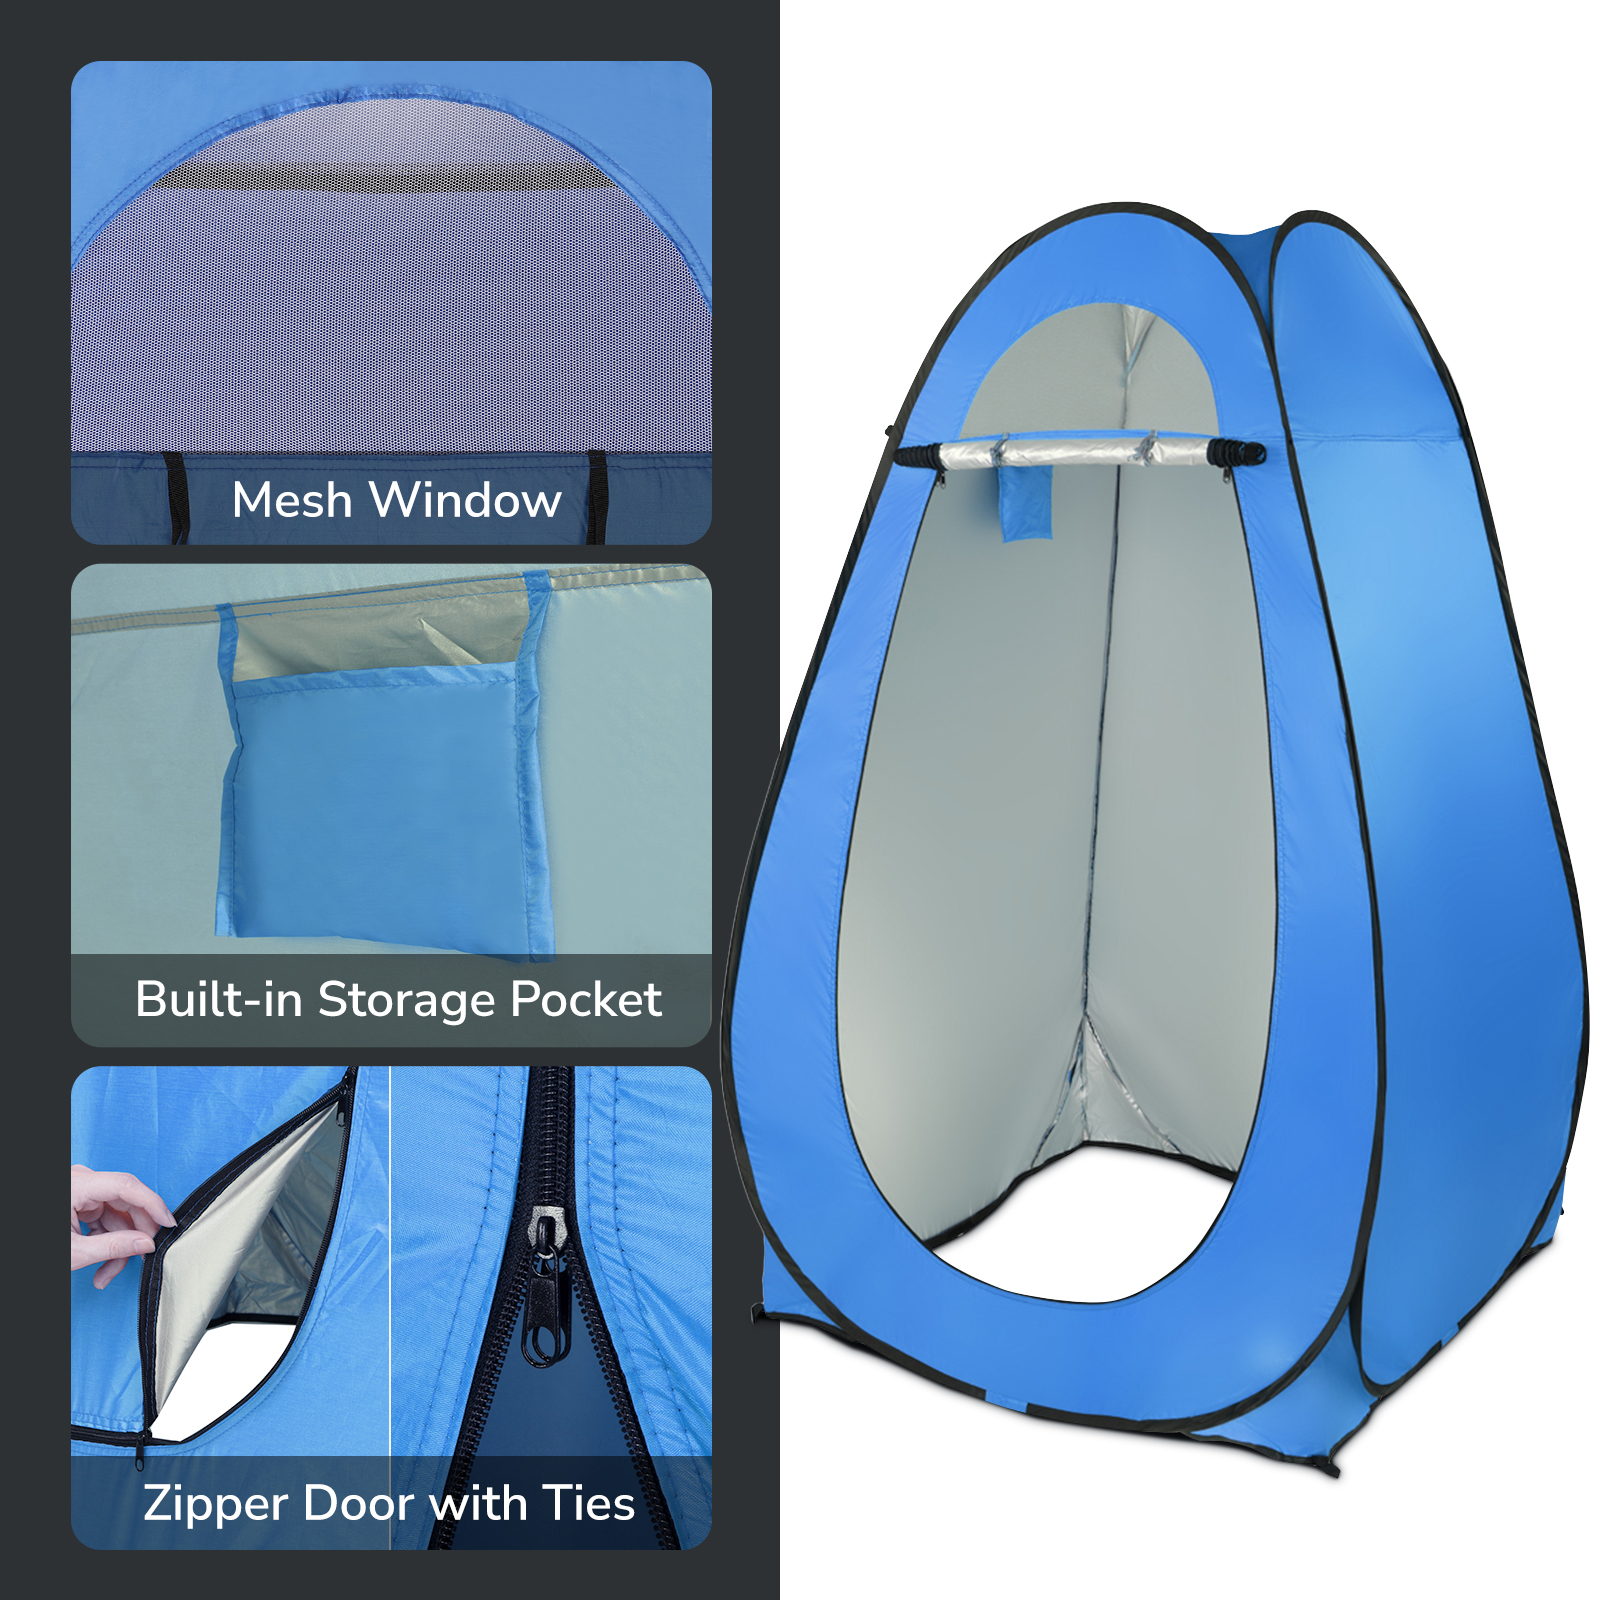 Ktaxon Blue Waterproof Automatic Pop up Oxford Shower Tent Blue - image 5 of 7